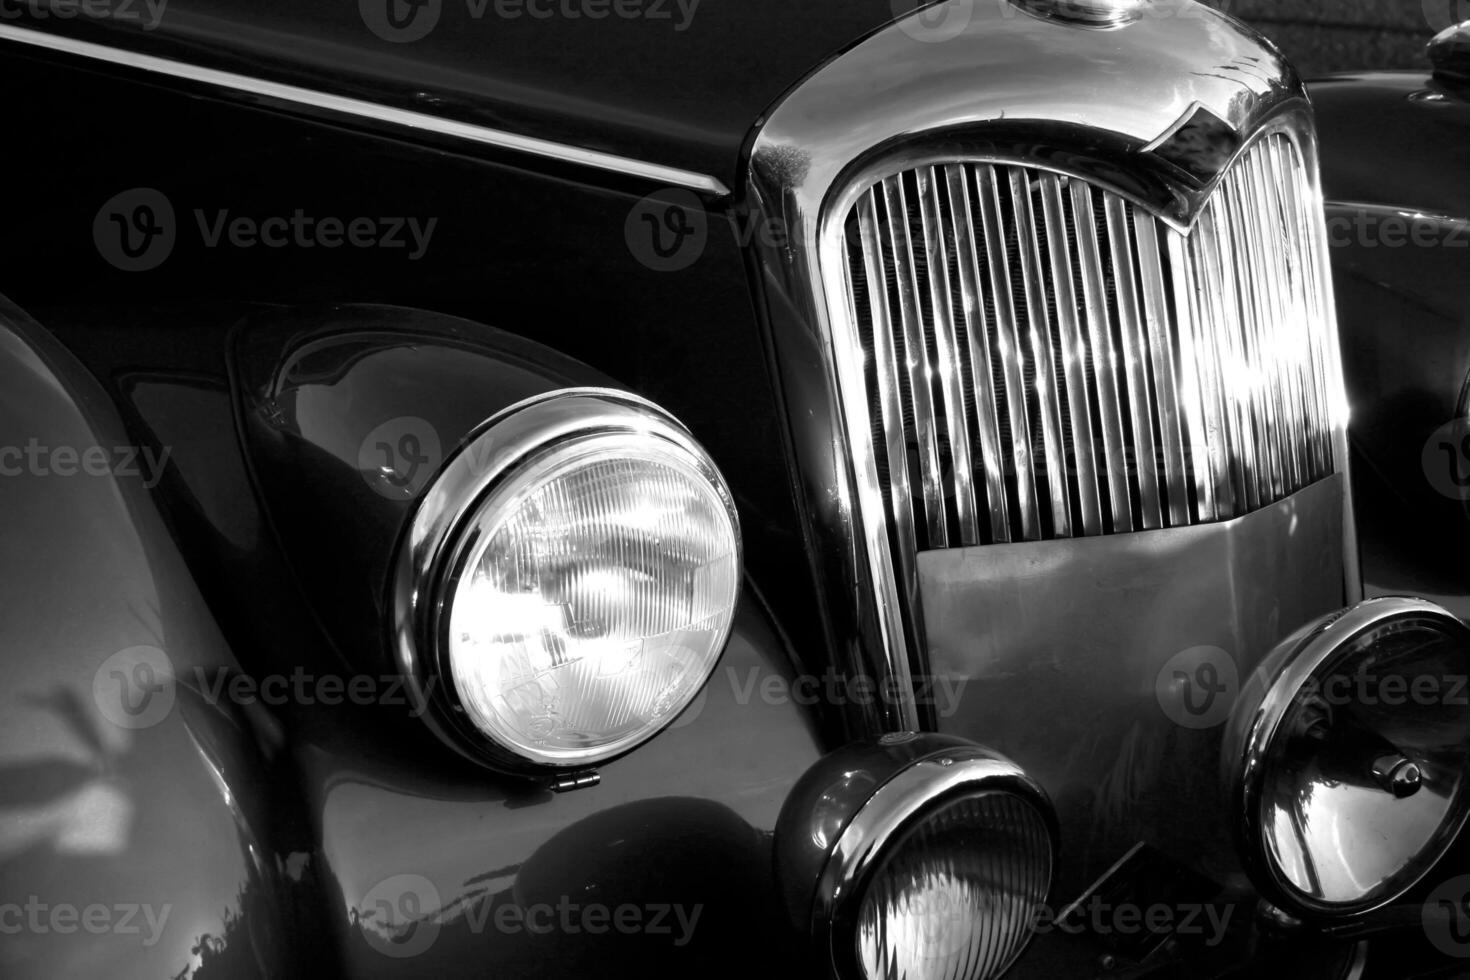 The front grill and headlight of the old beautiful car on the background copy space, card background photo